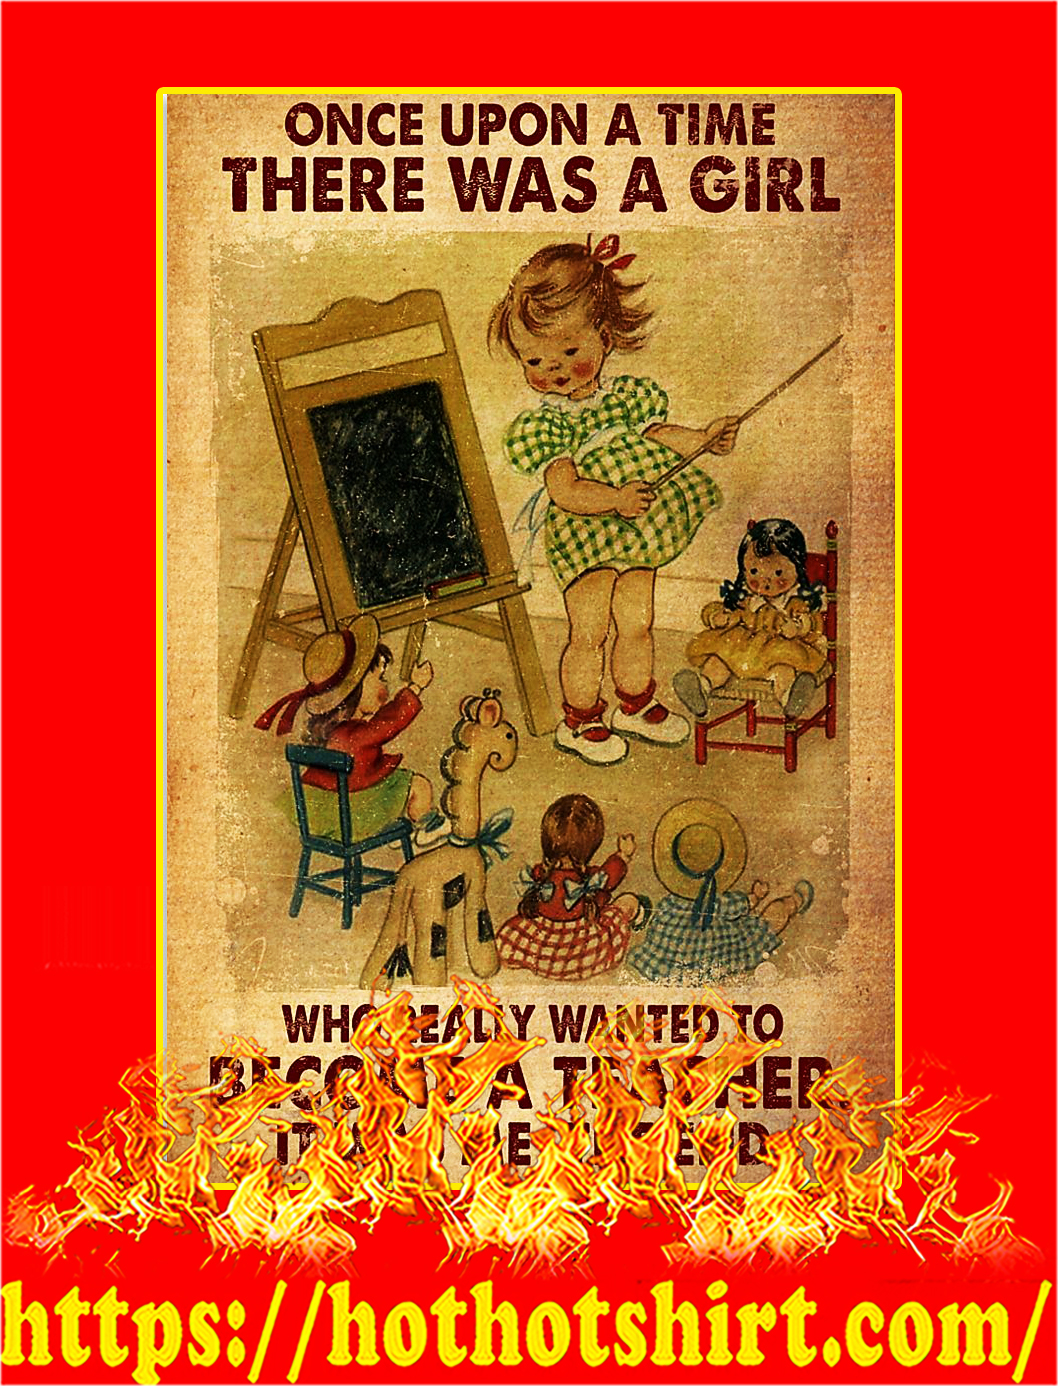 There was a girl who really wanted to teacher poster